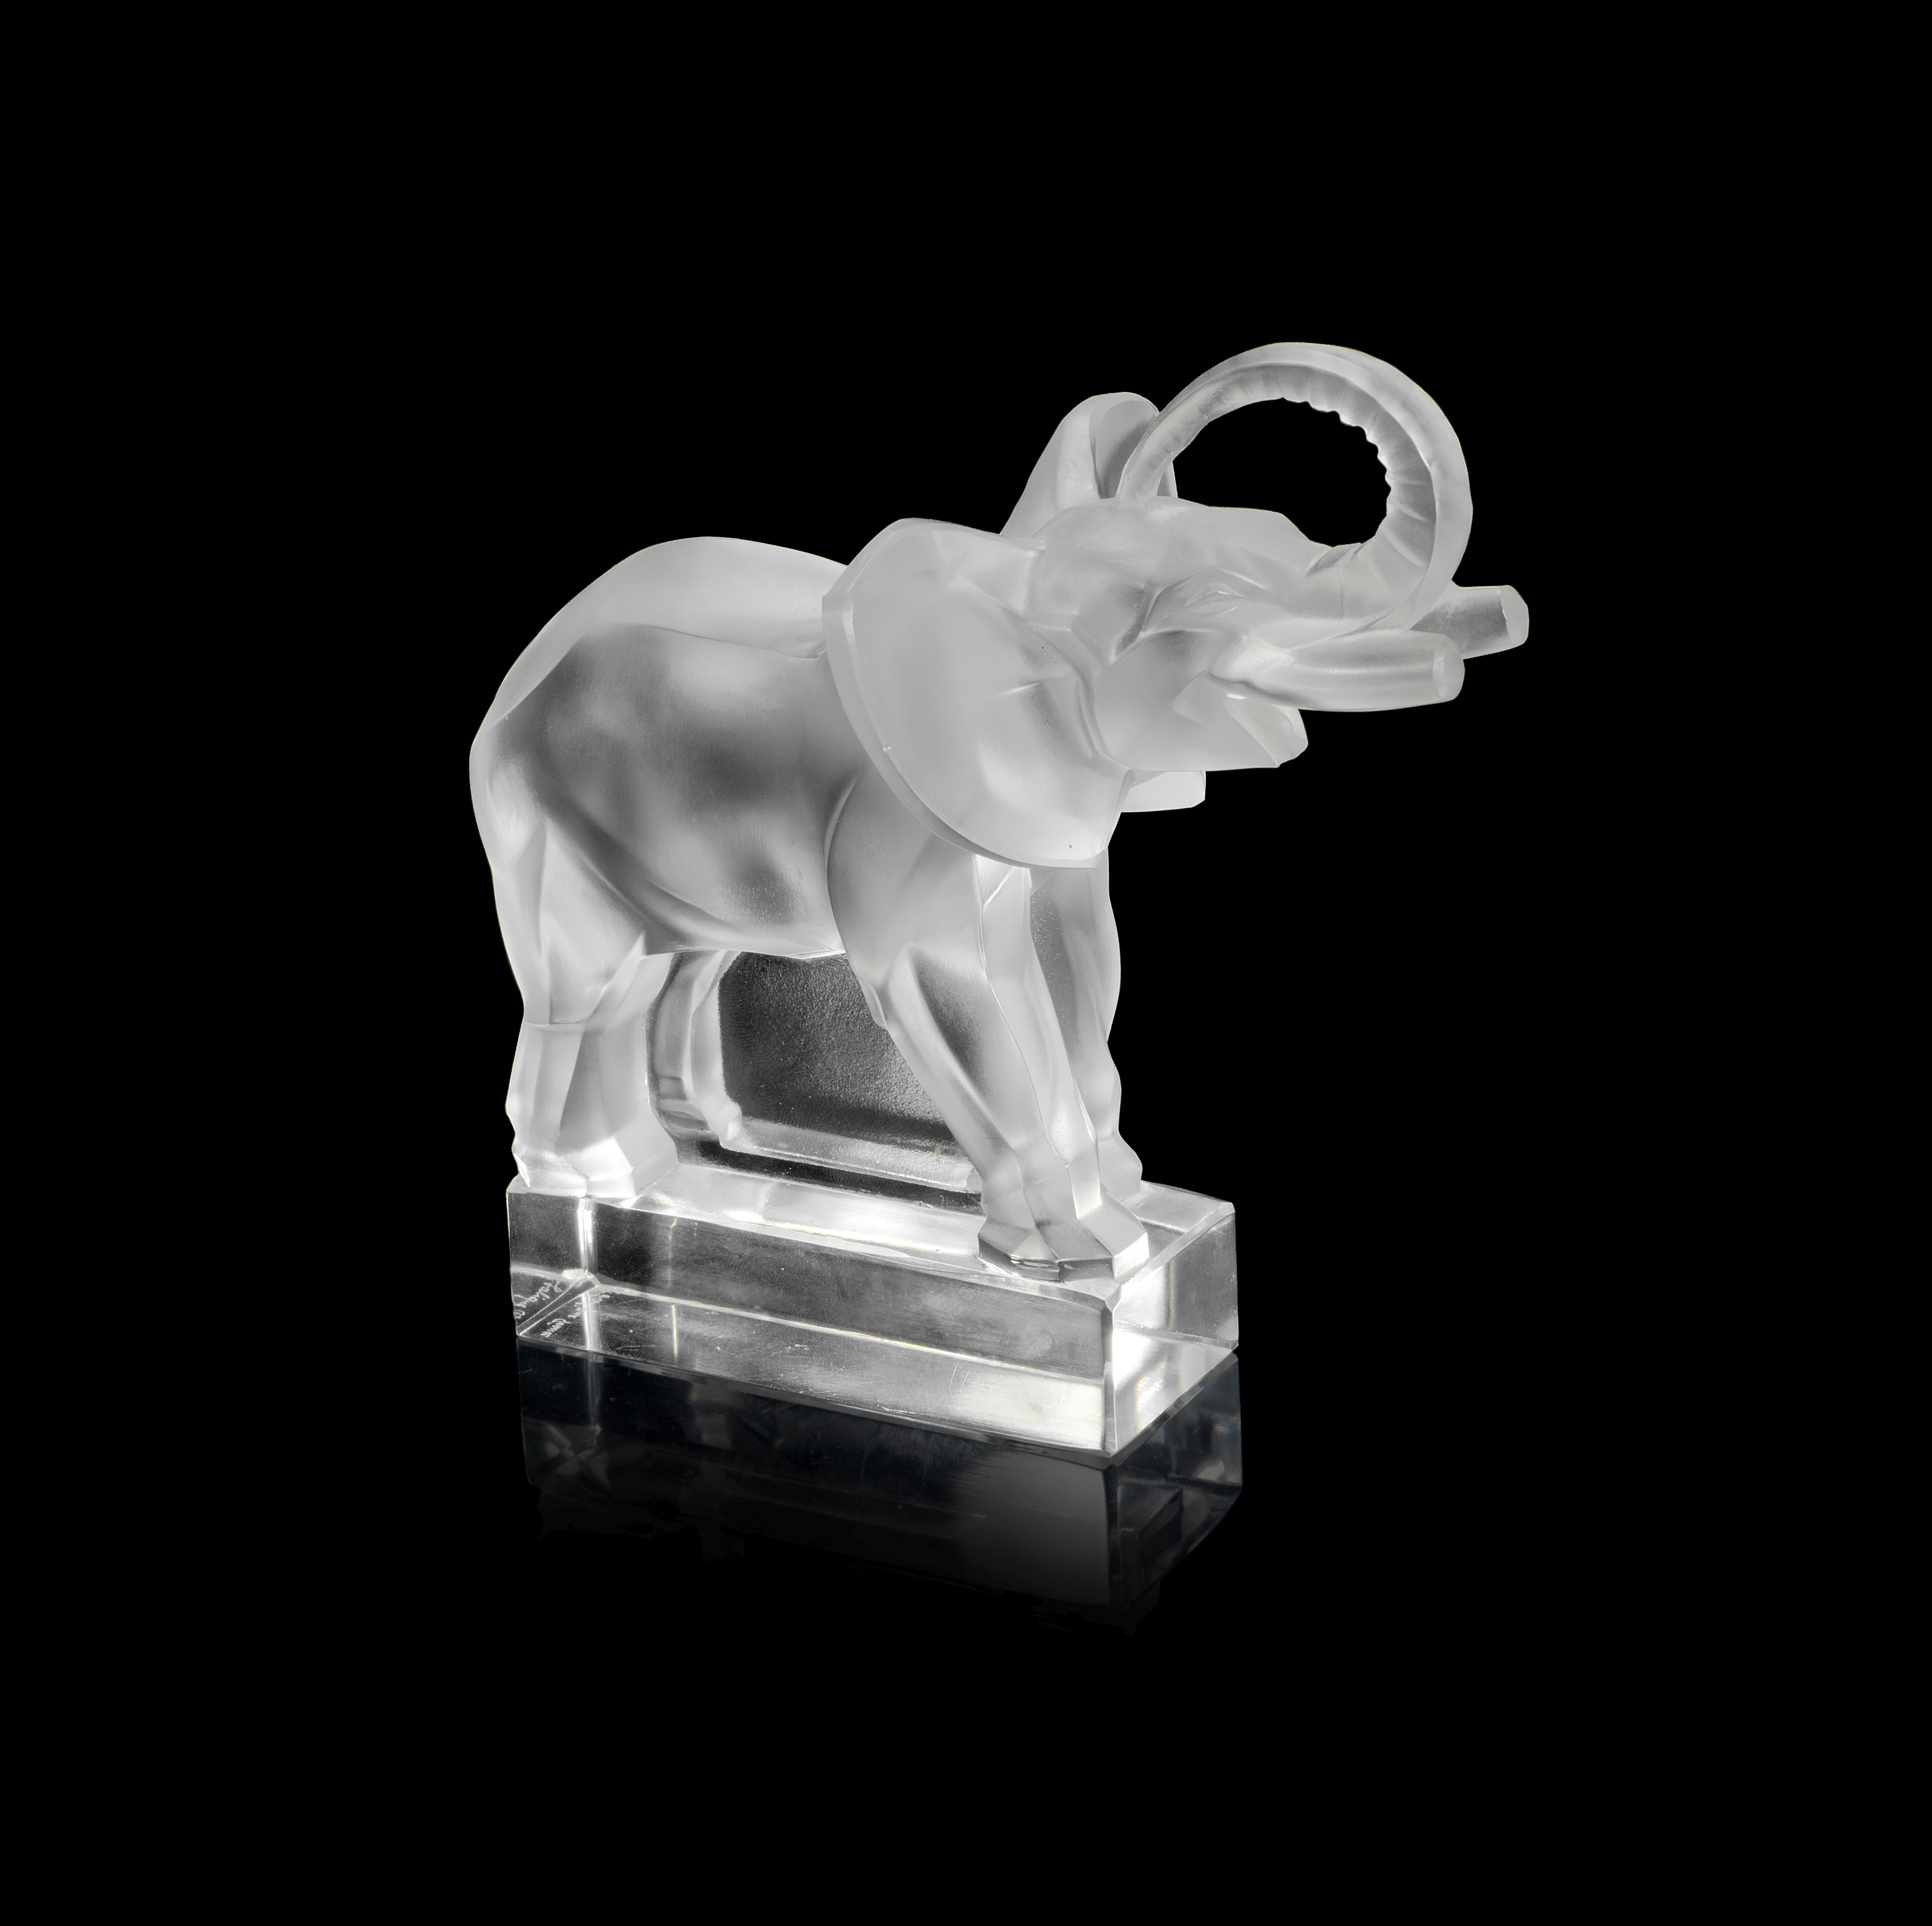 RENÉ LALIQUE (FRENCH, 1860-1945) A Post-War 'Éléphant' Paperweight, design introduced in 1931